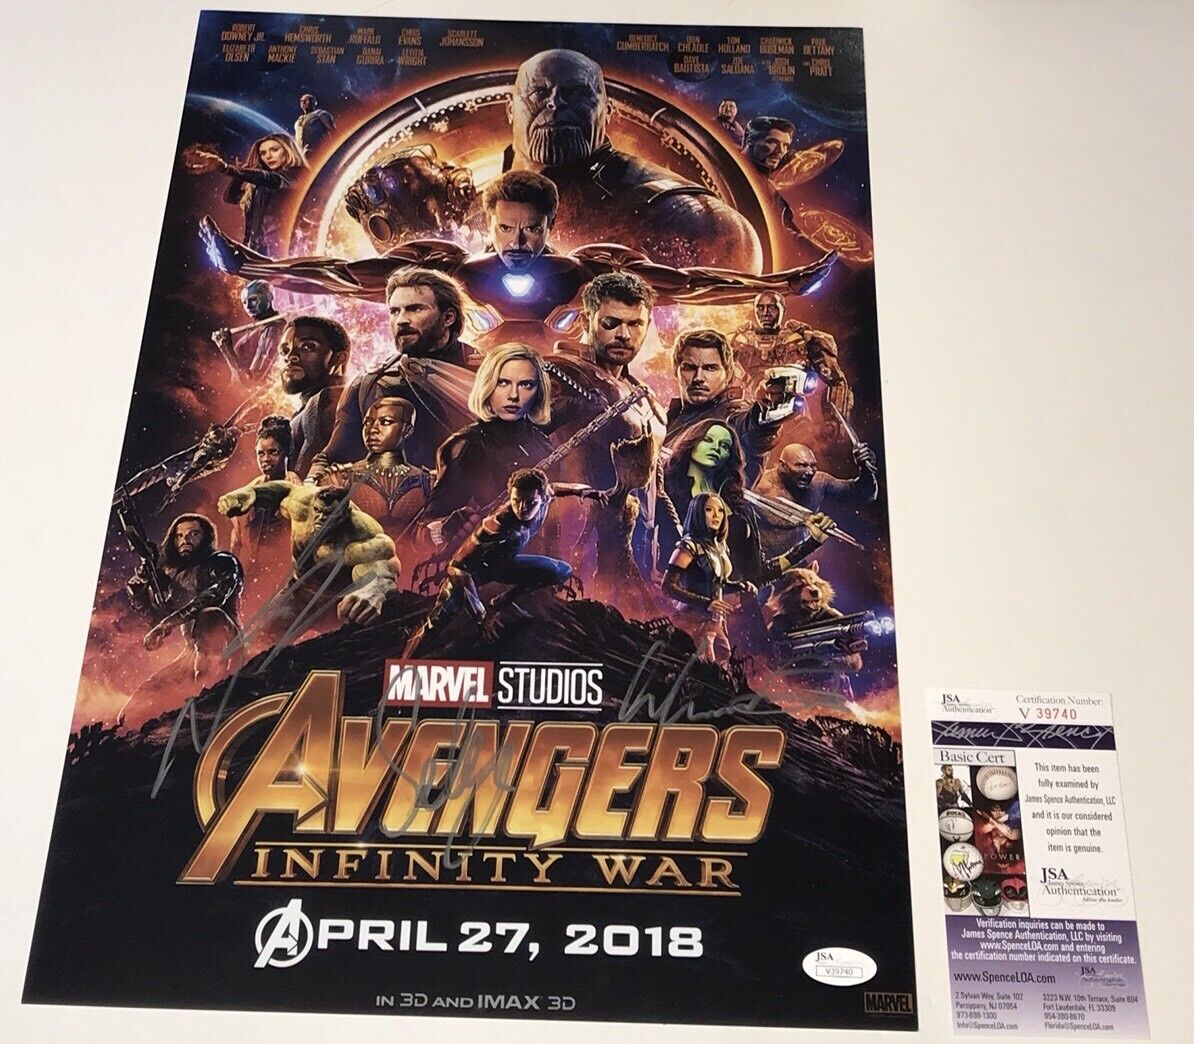 AVENGERS INFINITY WAR Cast X3 Signed 12x18 Photo Poster painting IN PERSON Autograph JSA COA